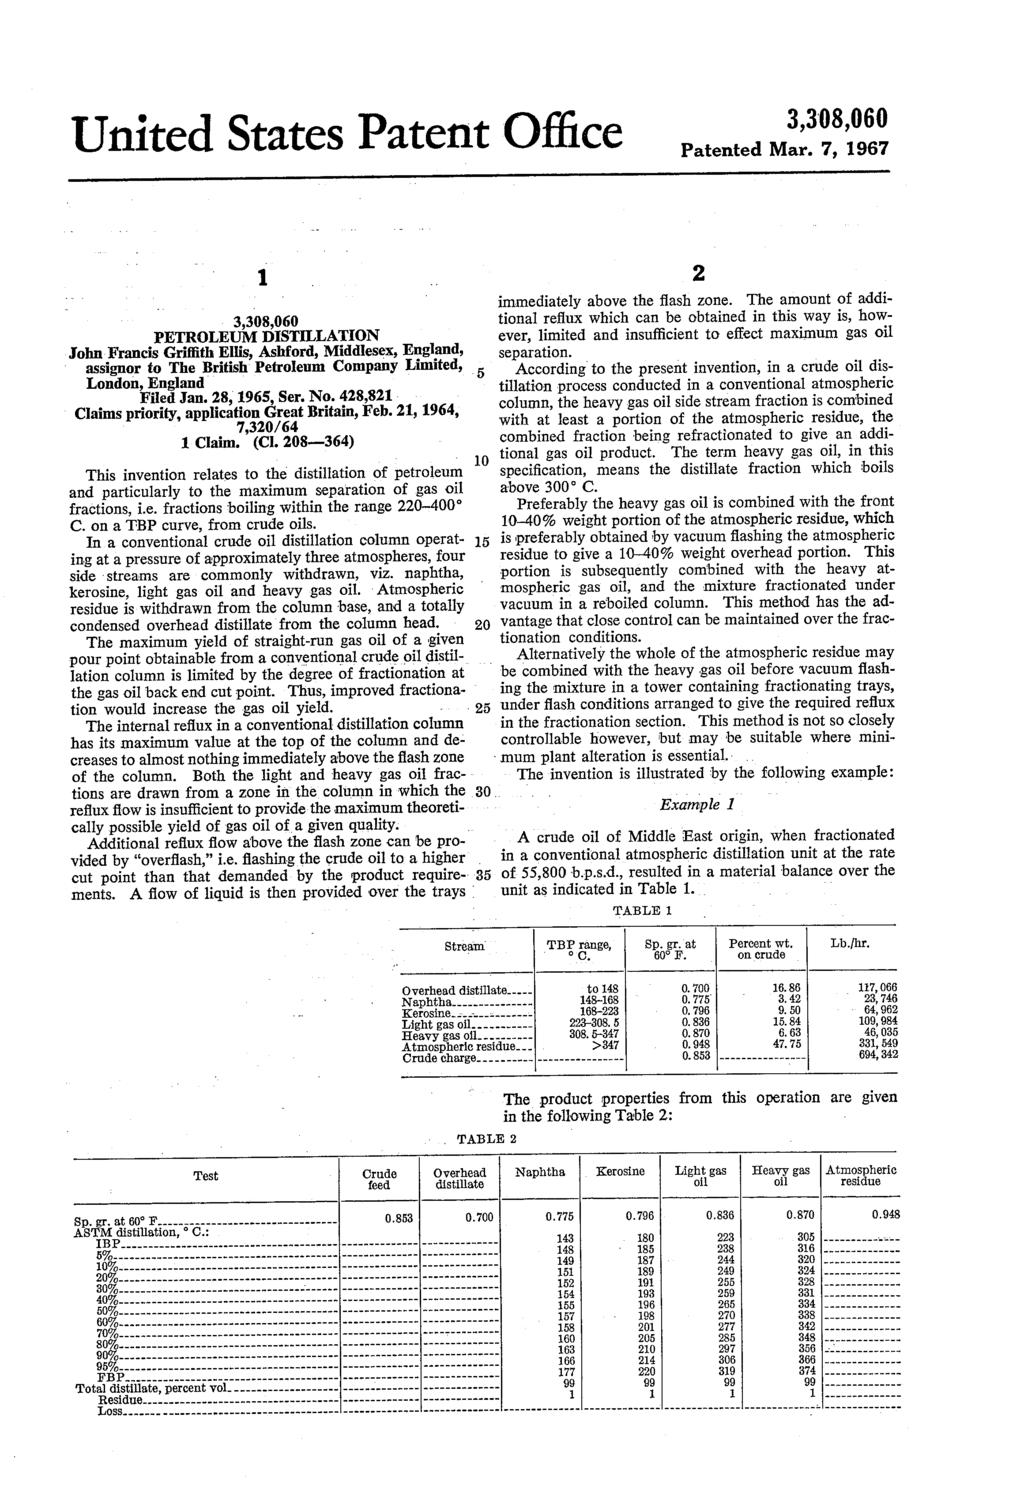 United States Patent Office Patented Mar. 7, 1967 1.